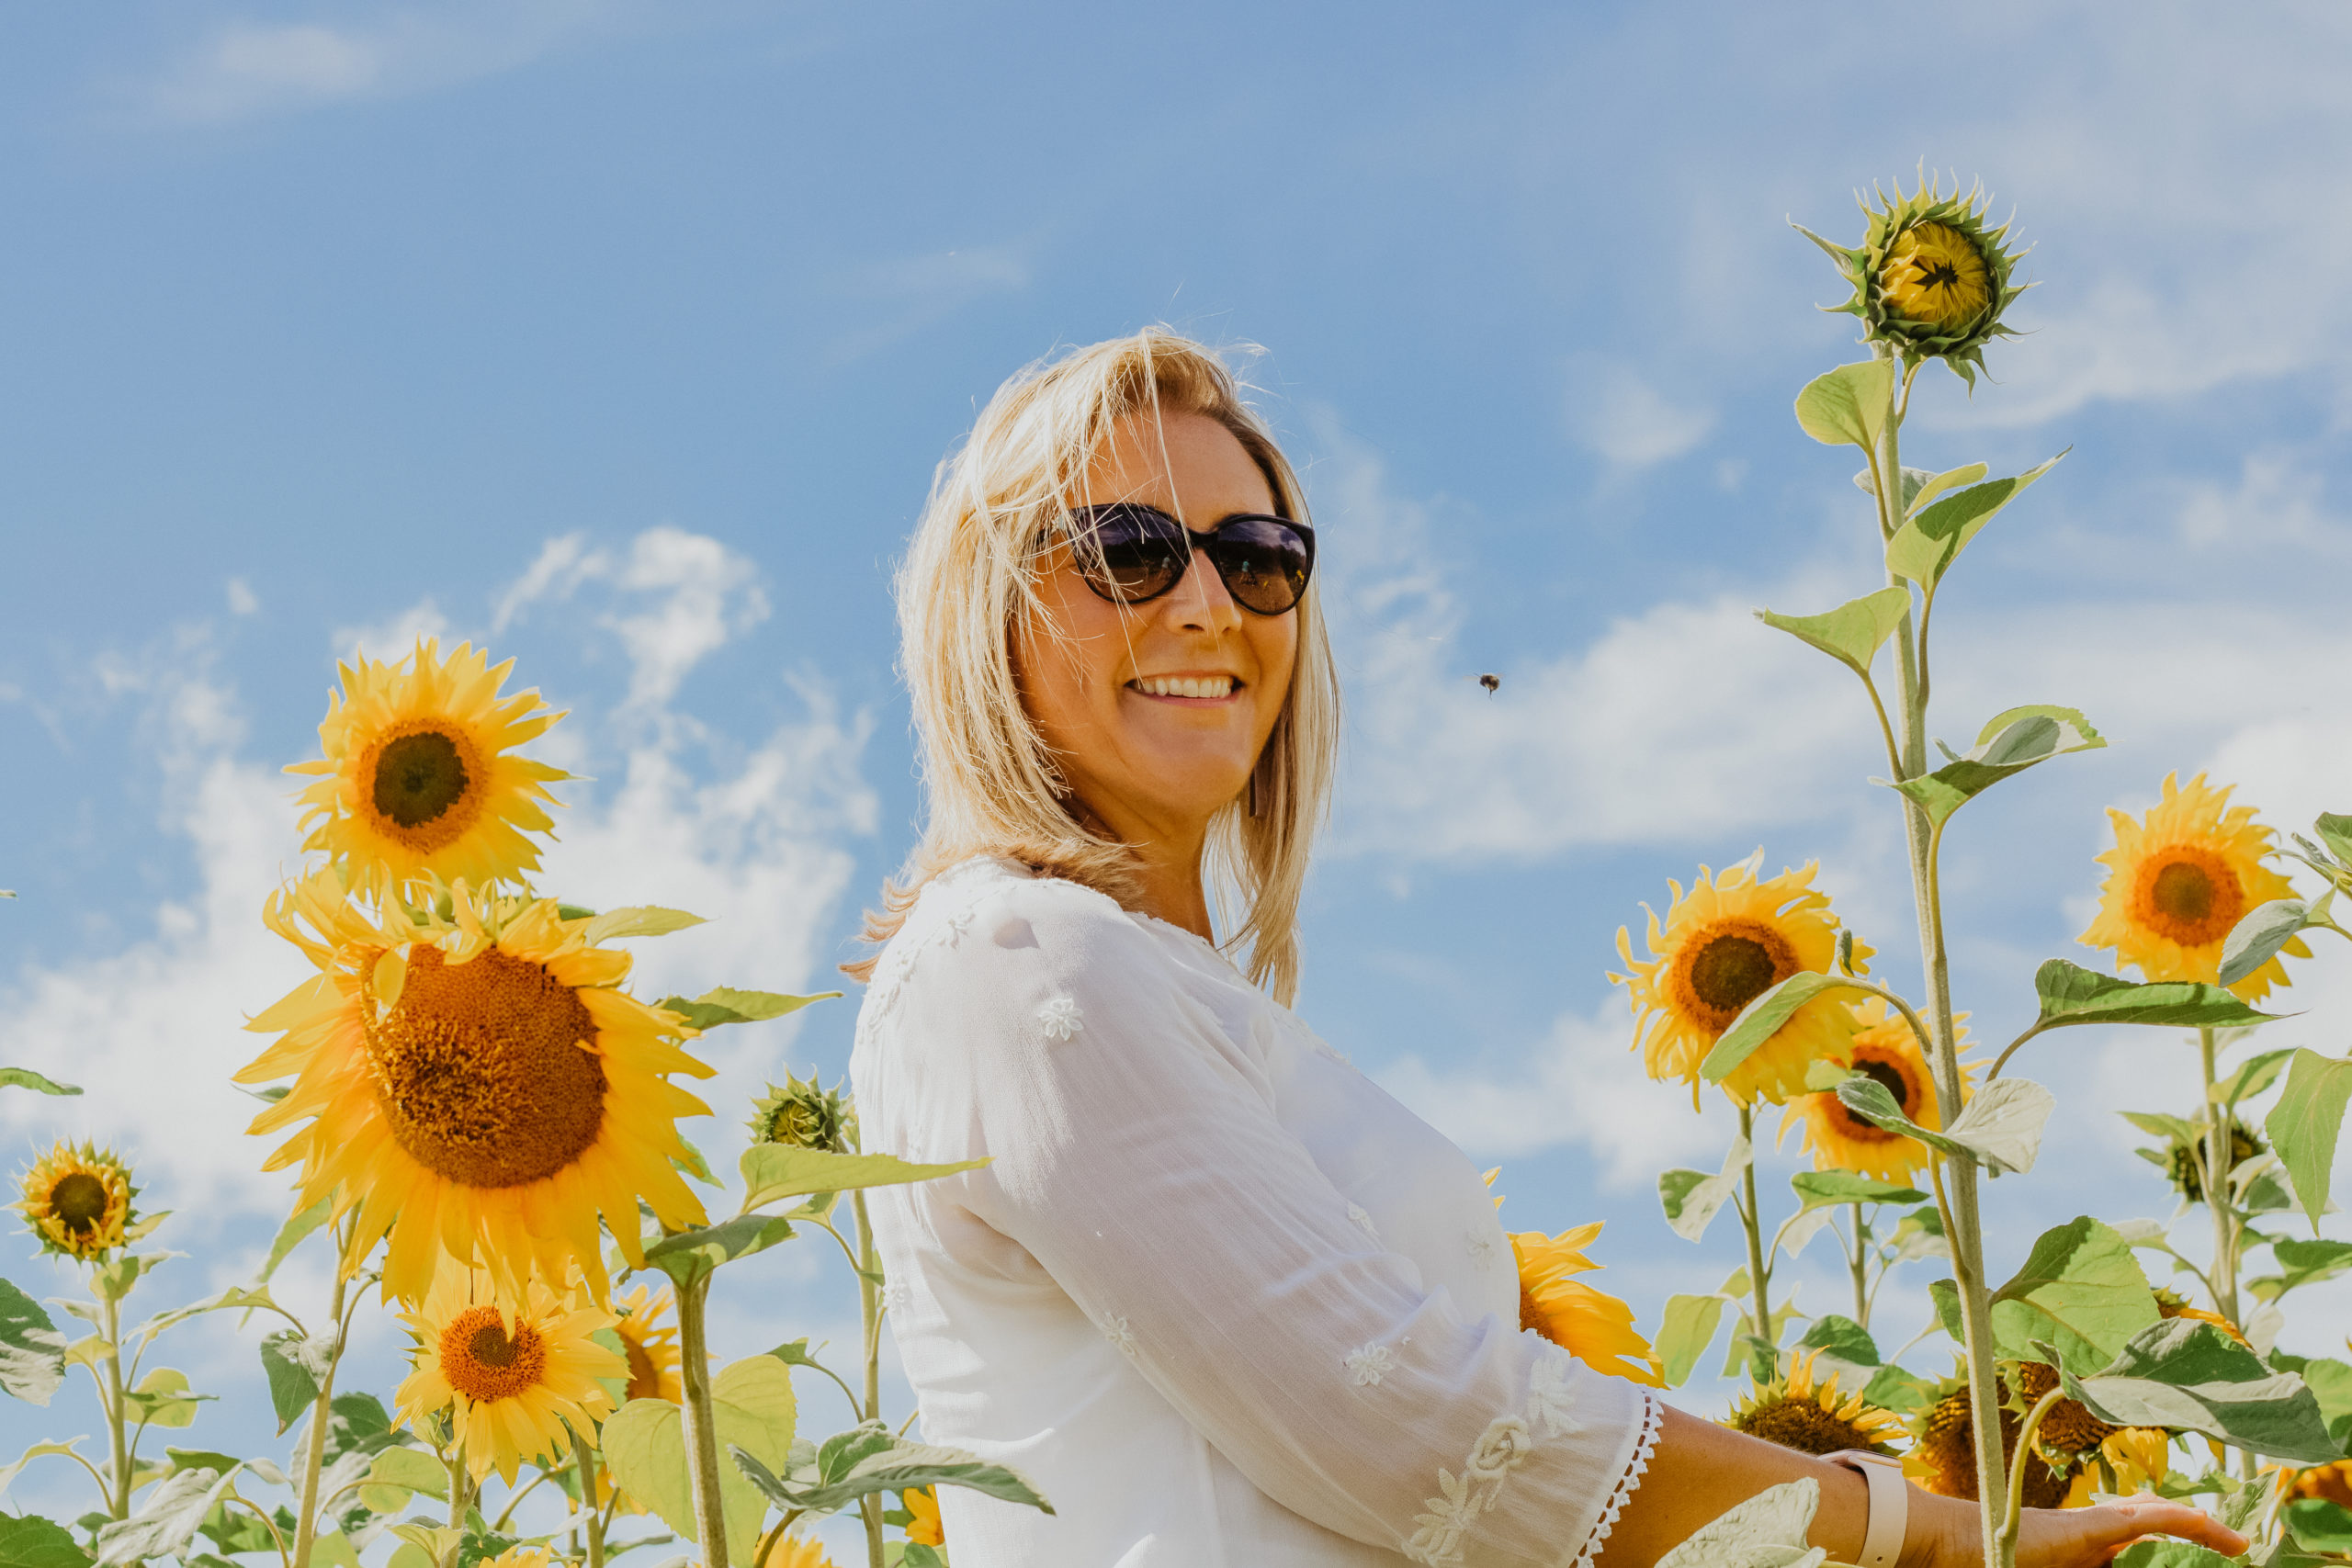 white woman with blonde hair in sunglassed smiling surrounded by sunflowers